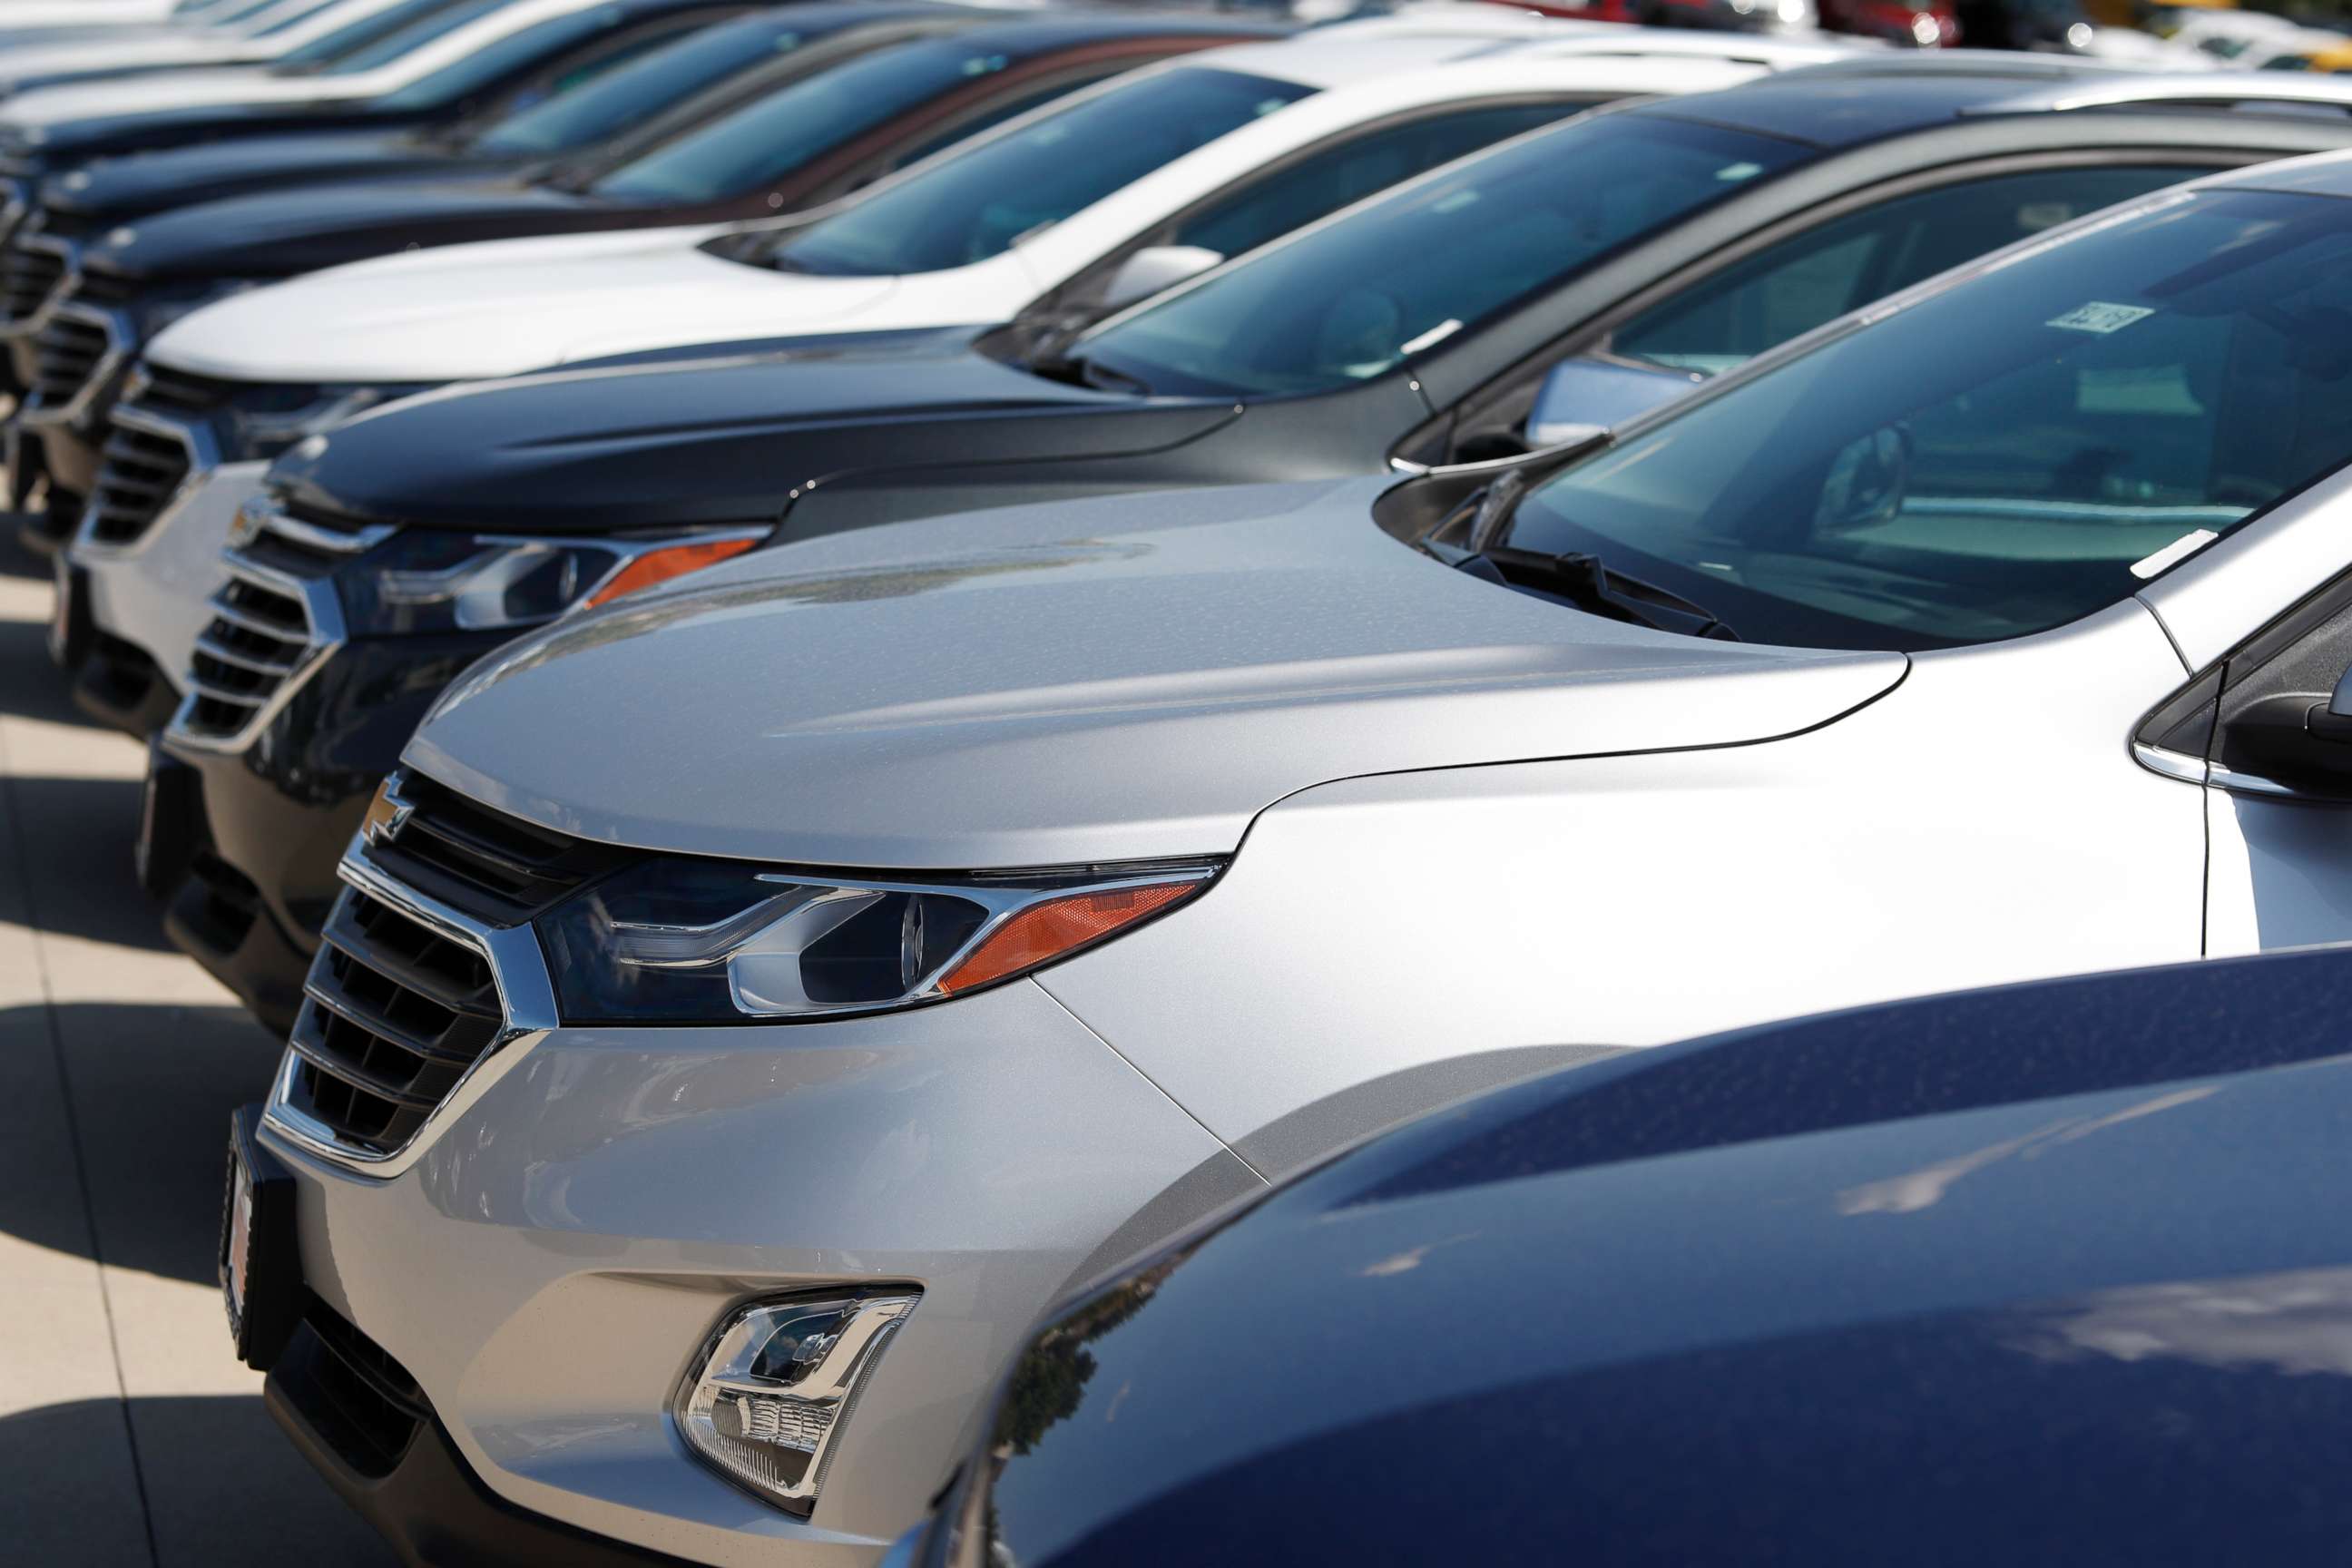 PHOTO: In this Sunday, July 28, 2019, file photograph, unsold 2019 Chevrolet Equinox sports utility vehicles sit at a dealership in Englewood, Colo.